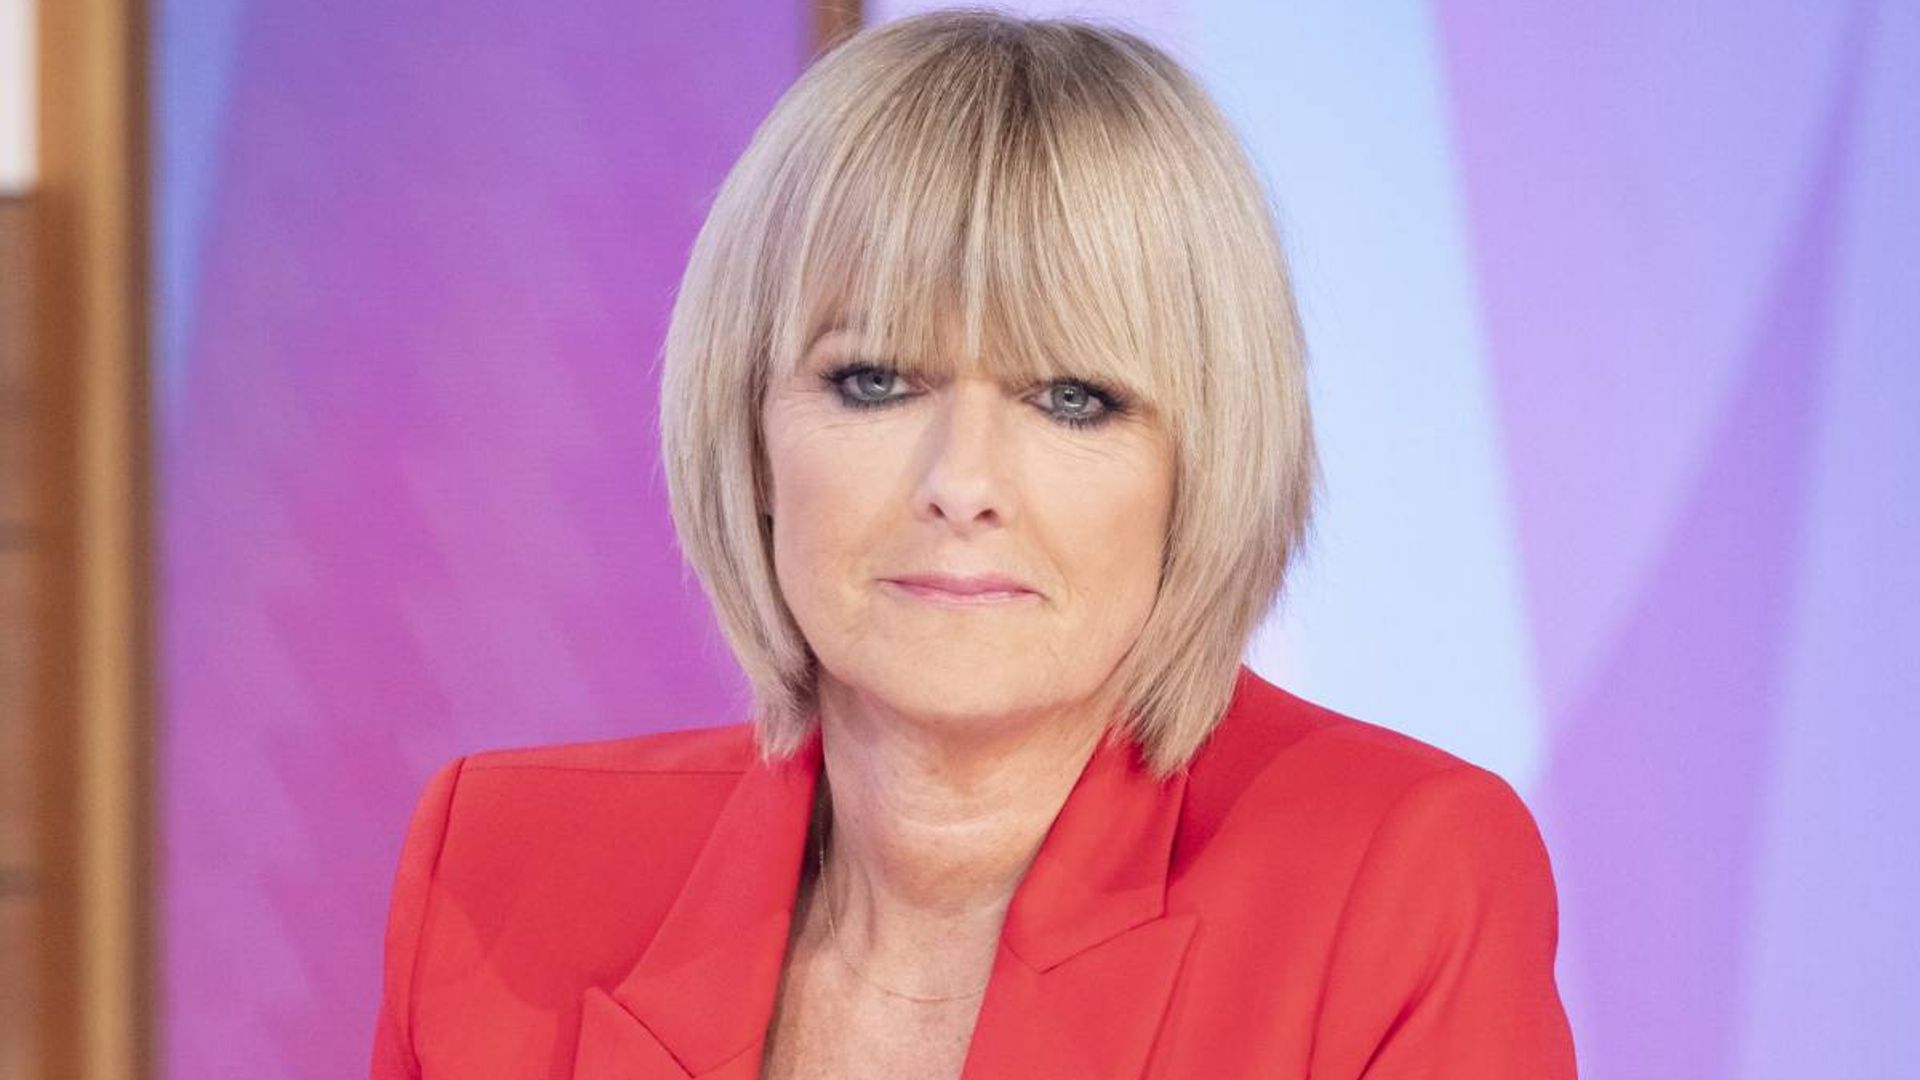 Jane Moore reveals drastic hair transformation during lockdown – and fans react!